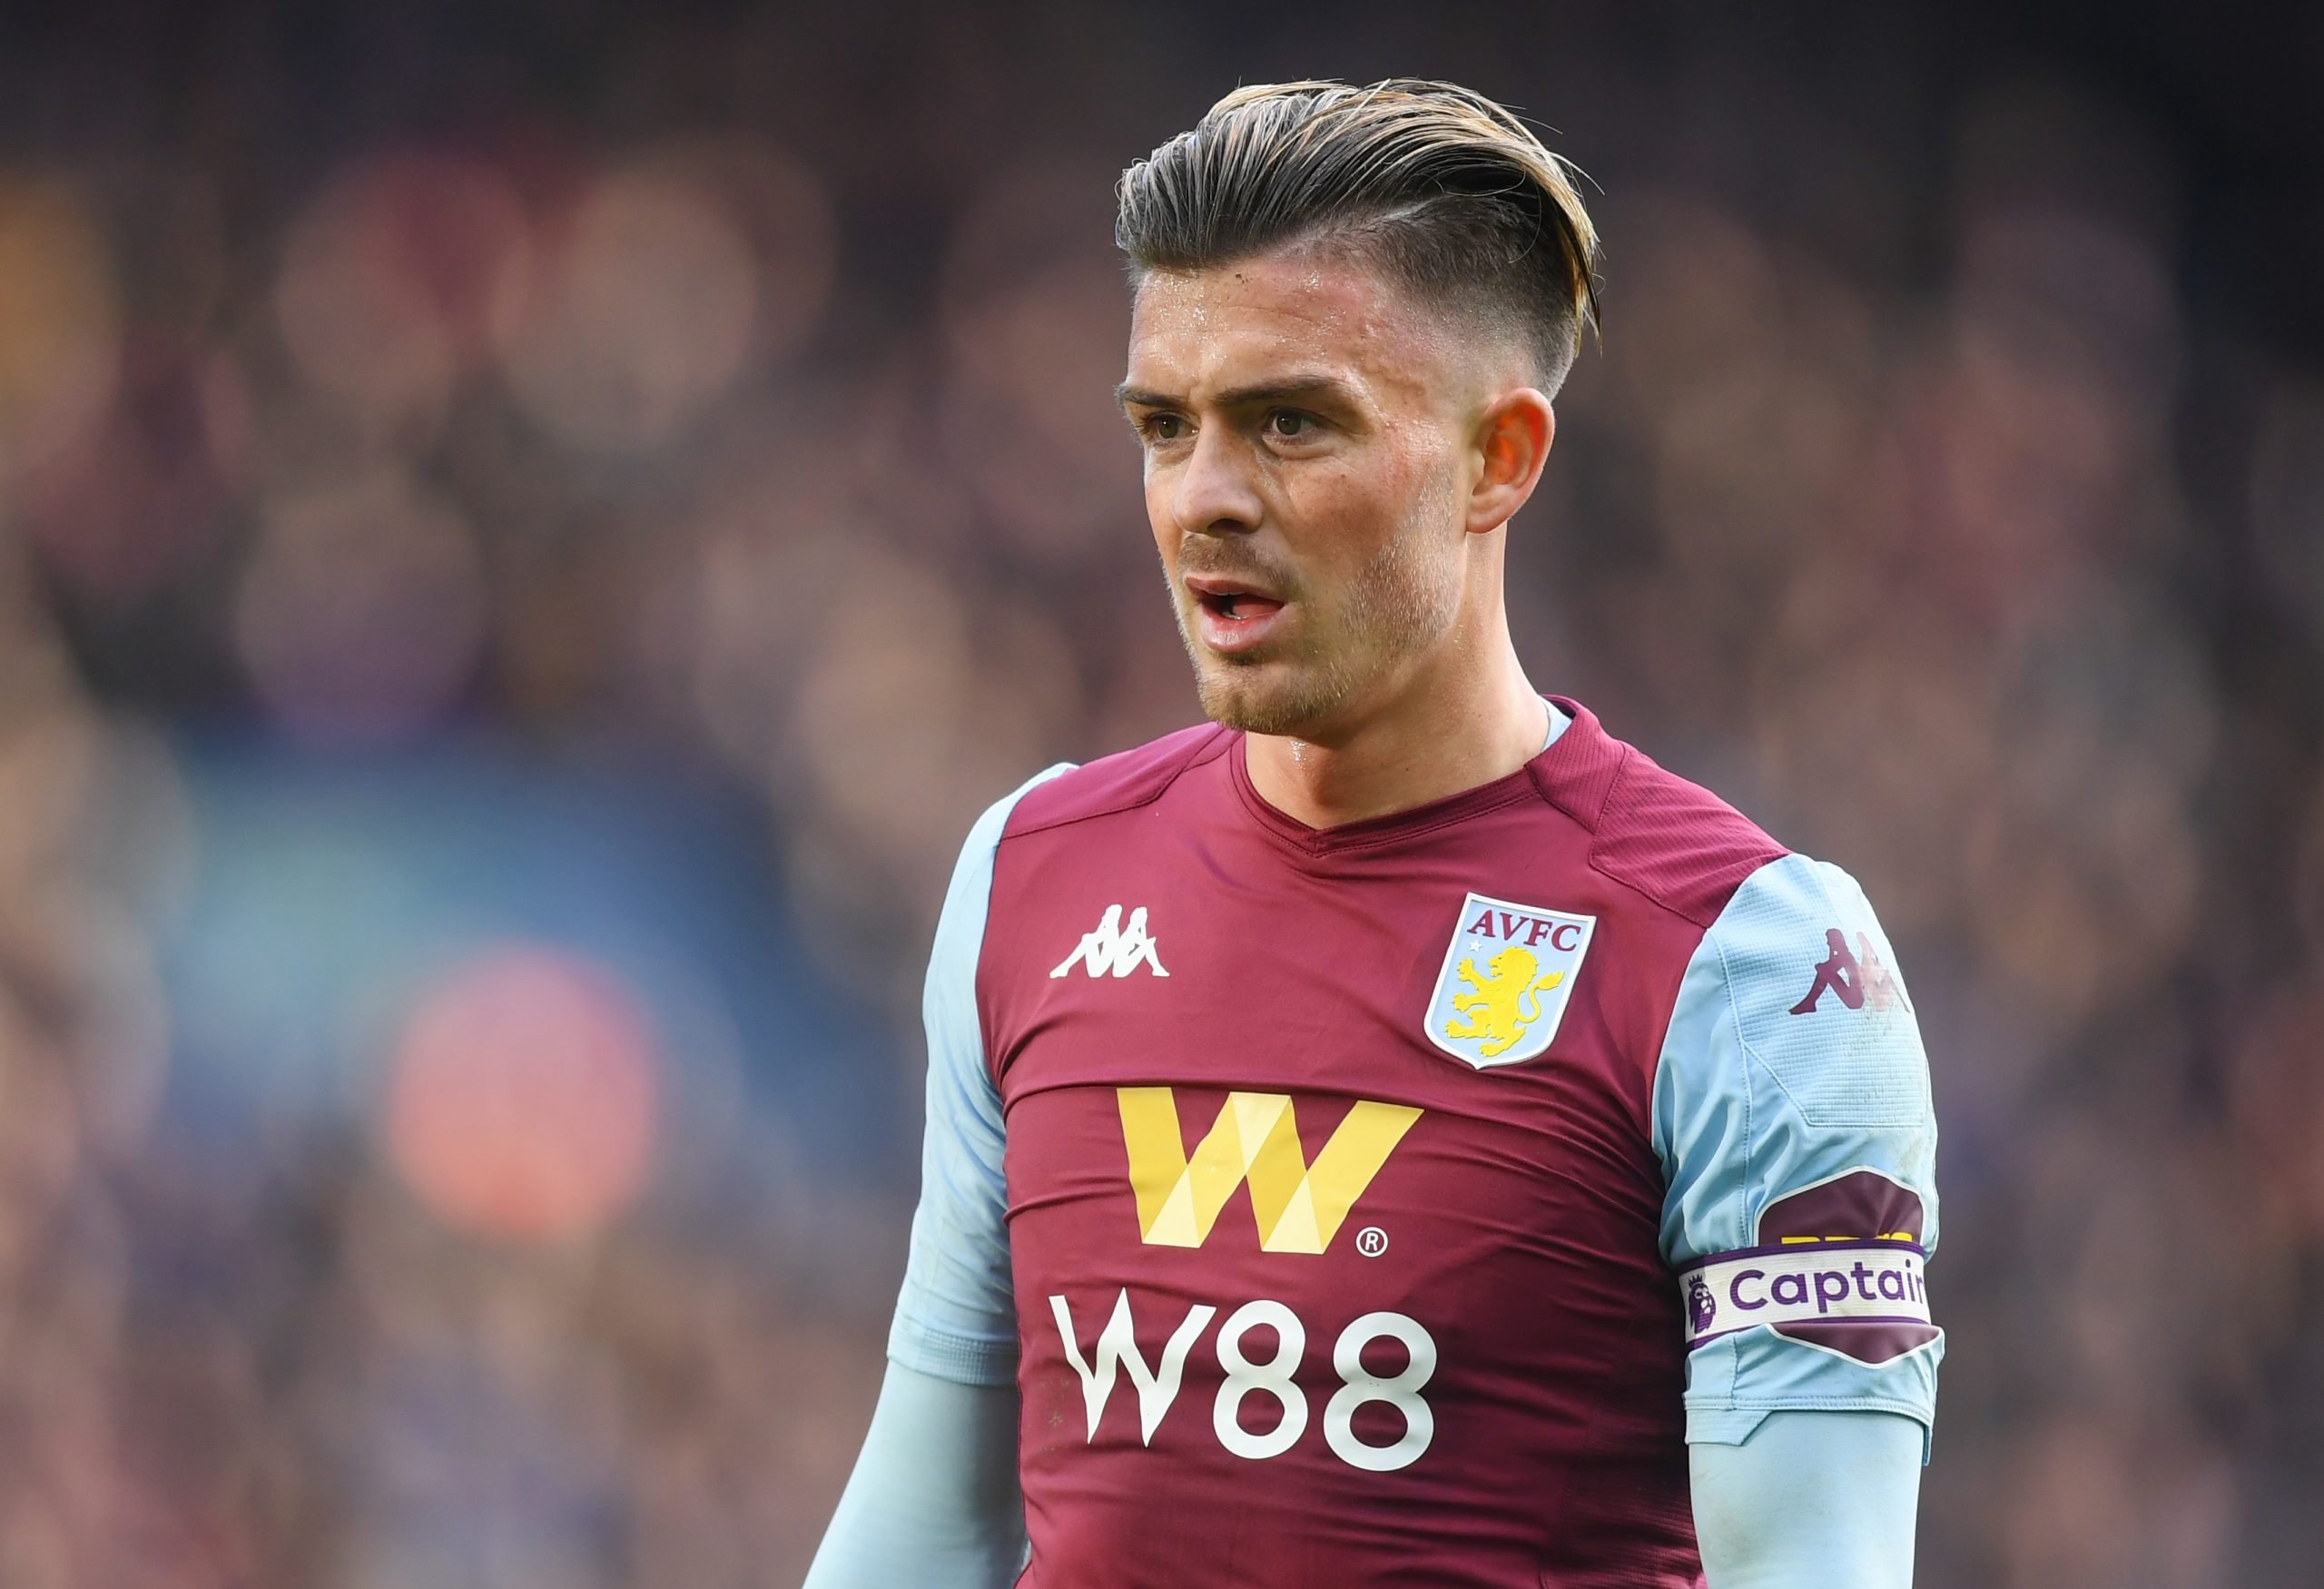 Scholes urges Grealish to join Manchester City among other clubs (Grealish is seen in the picture)